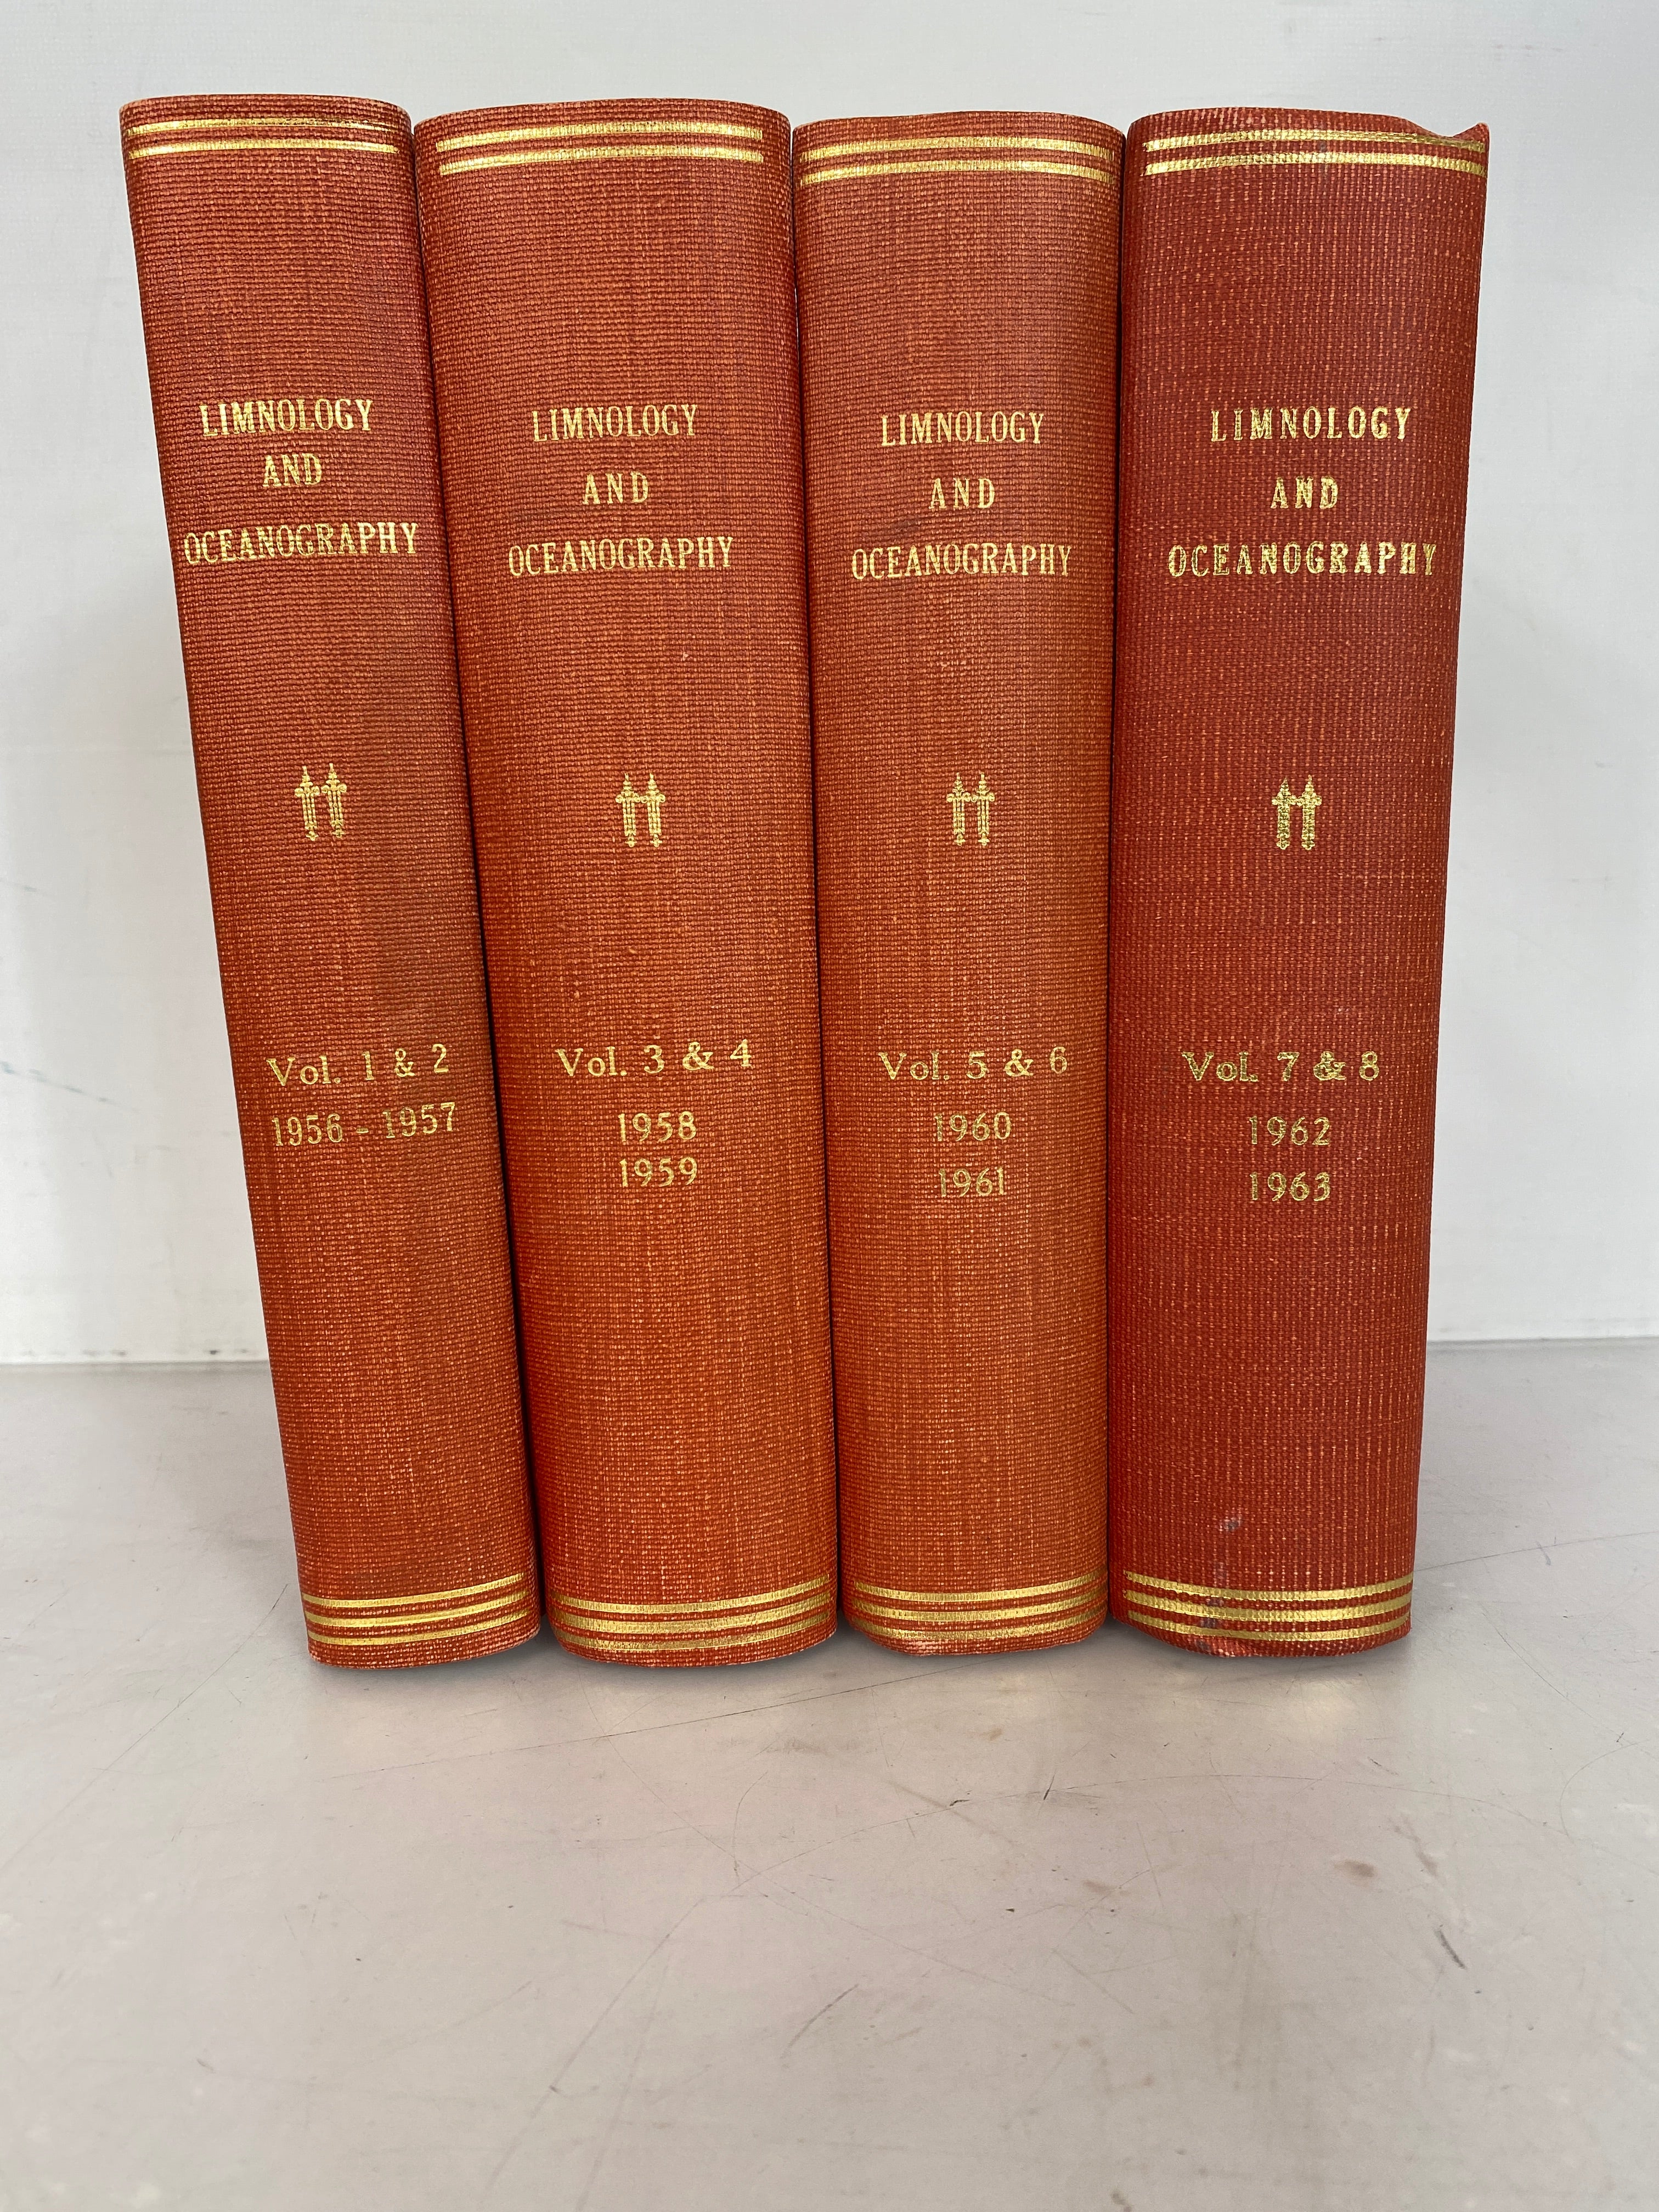 Limnology and Oceanography Set of 4 1956-1963 Vol. 1-8 HC